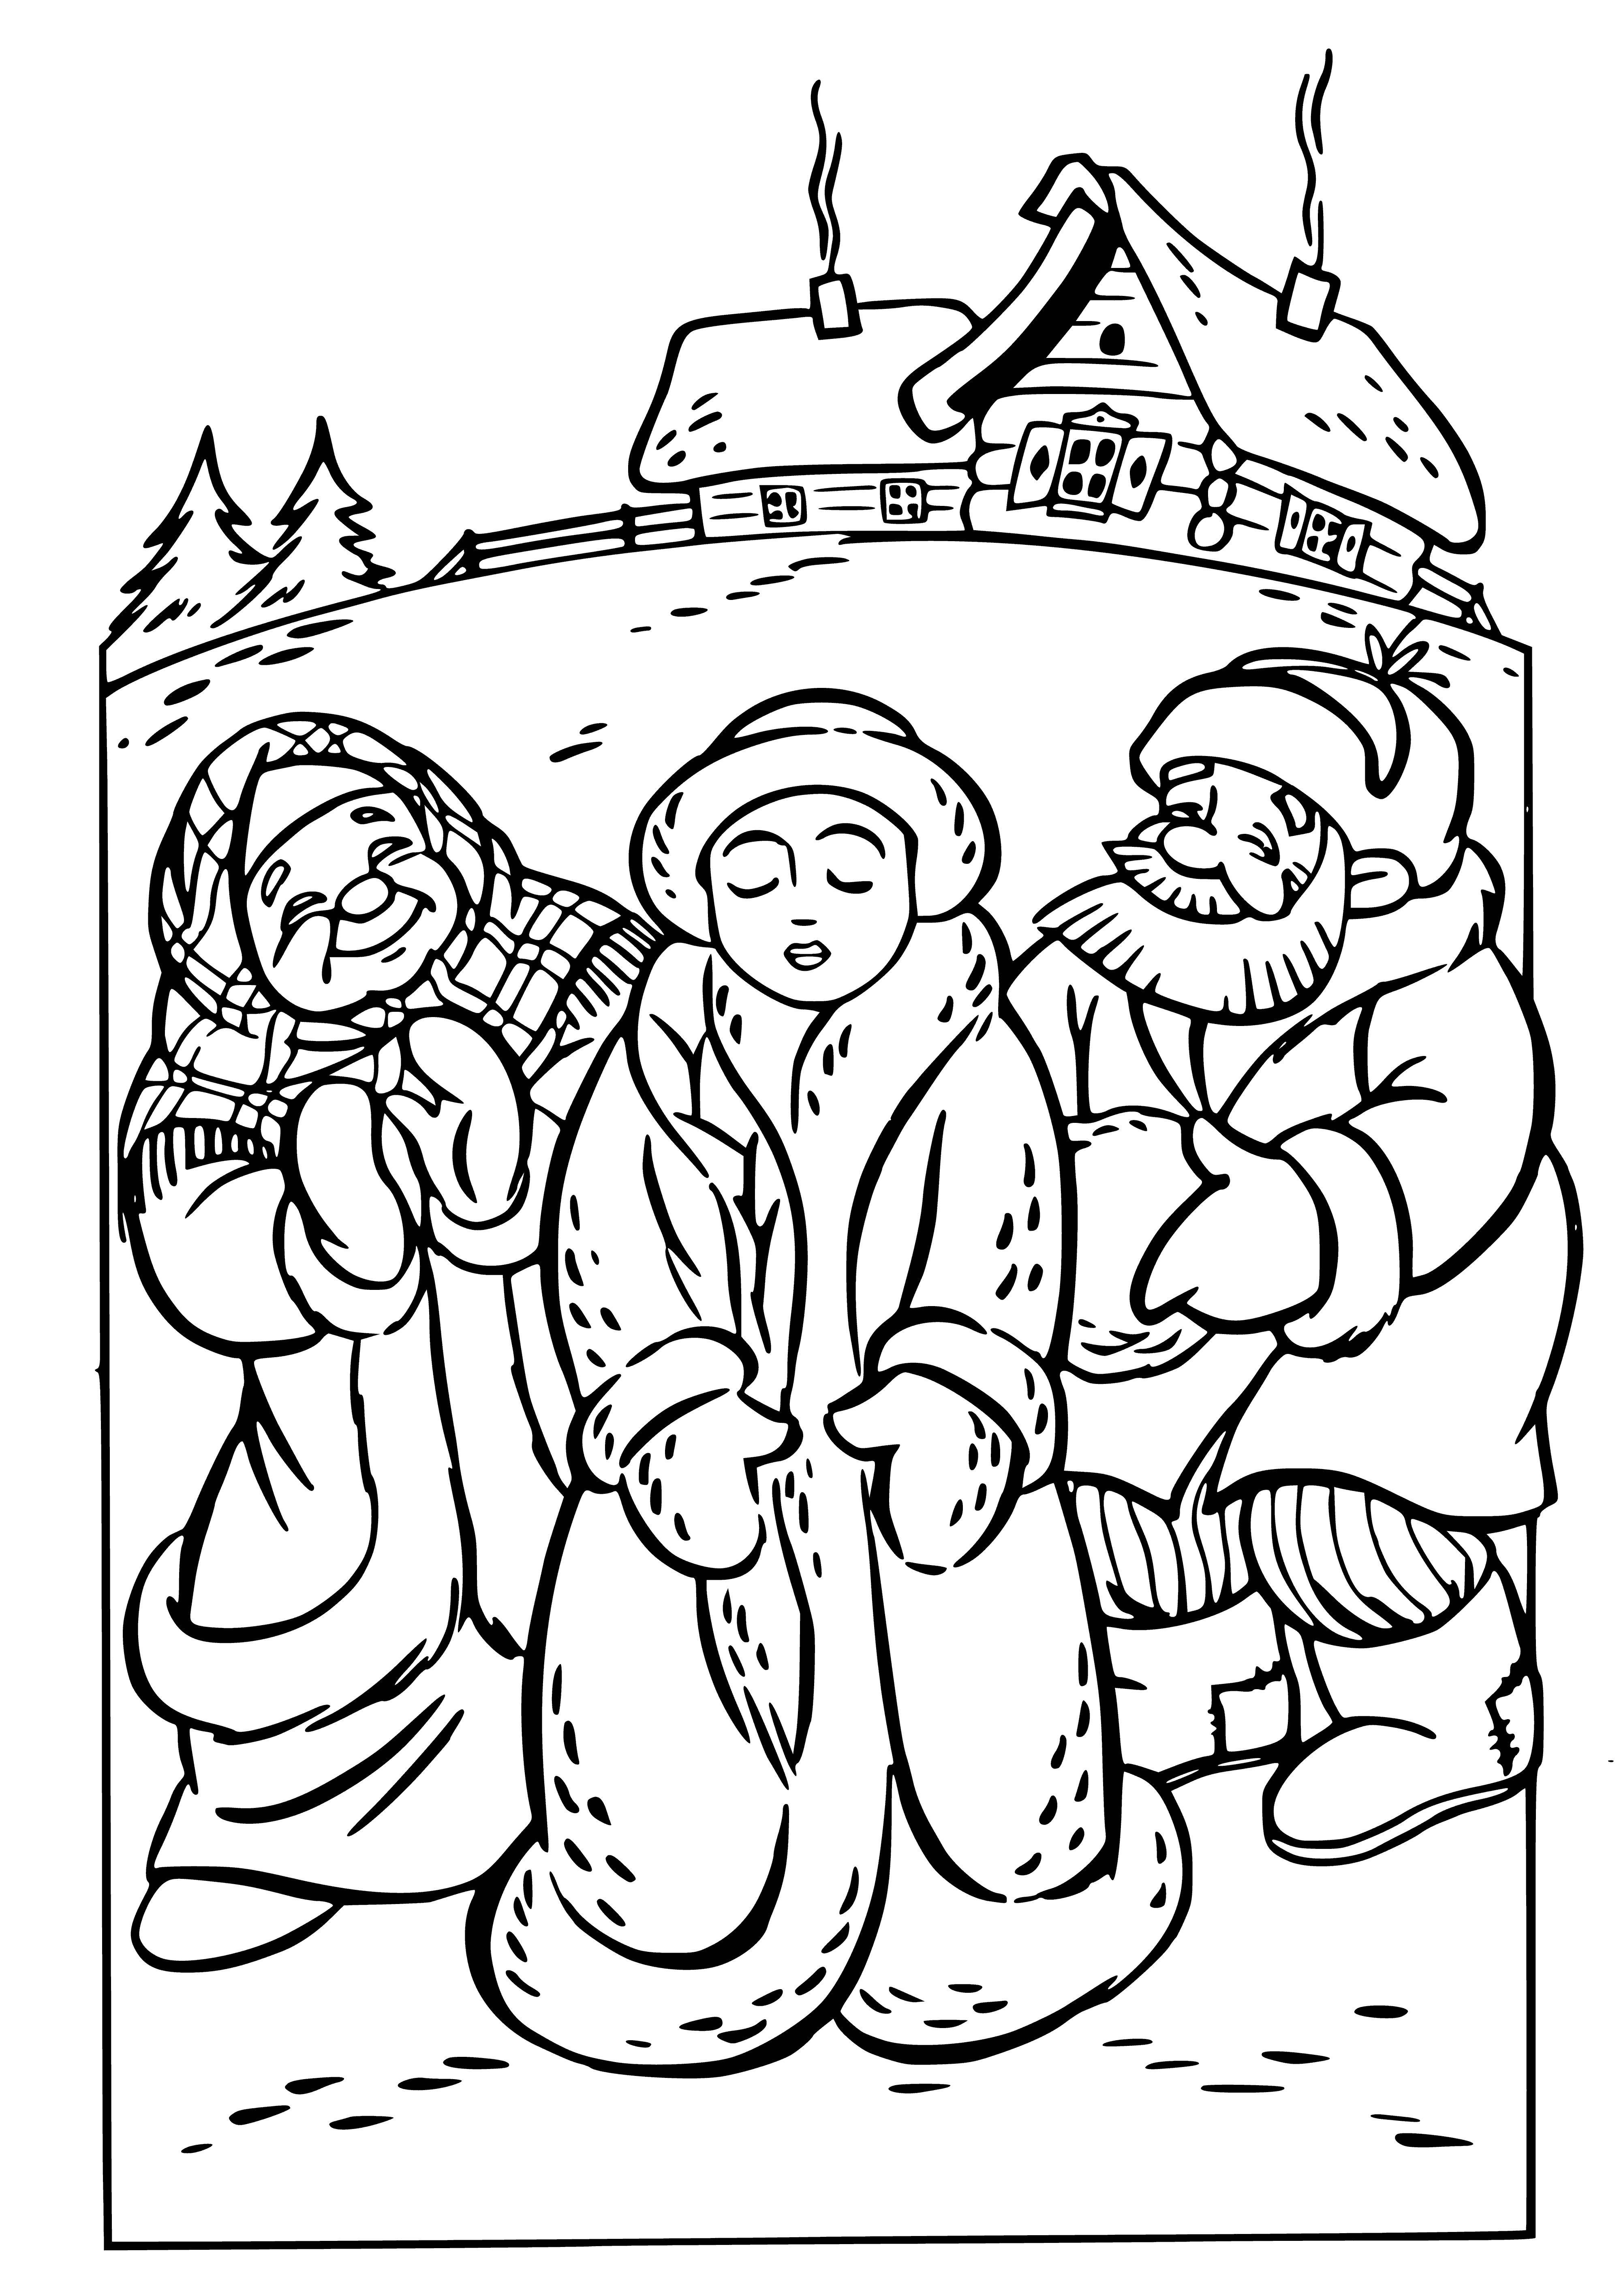 Snow Maiden girl coloring page